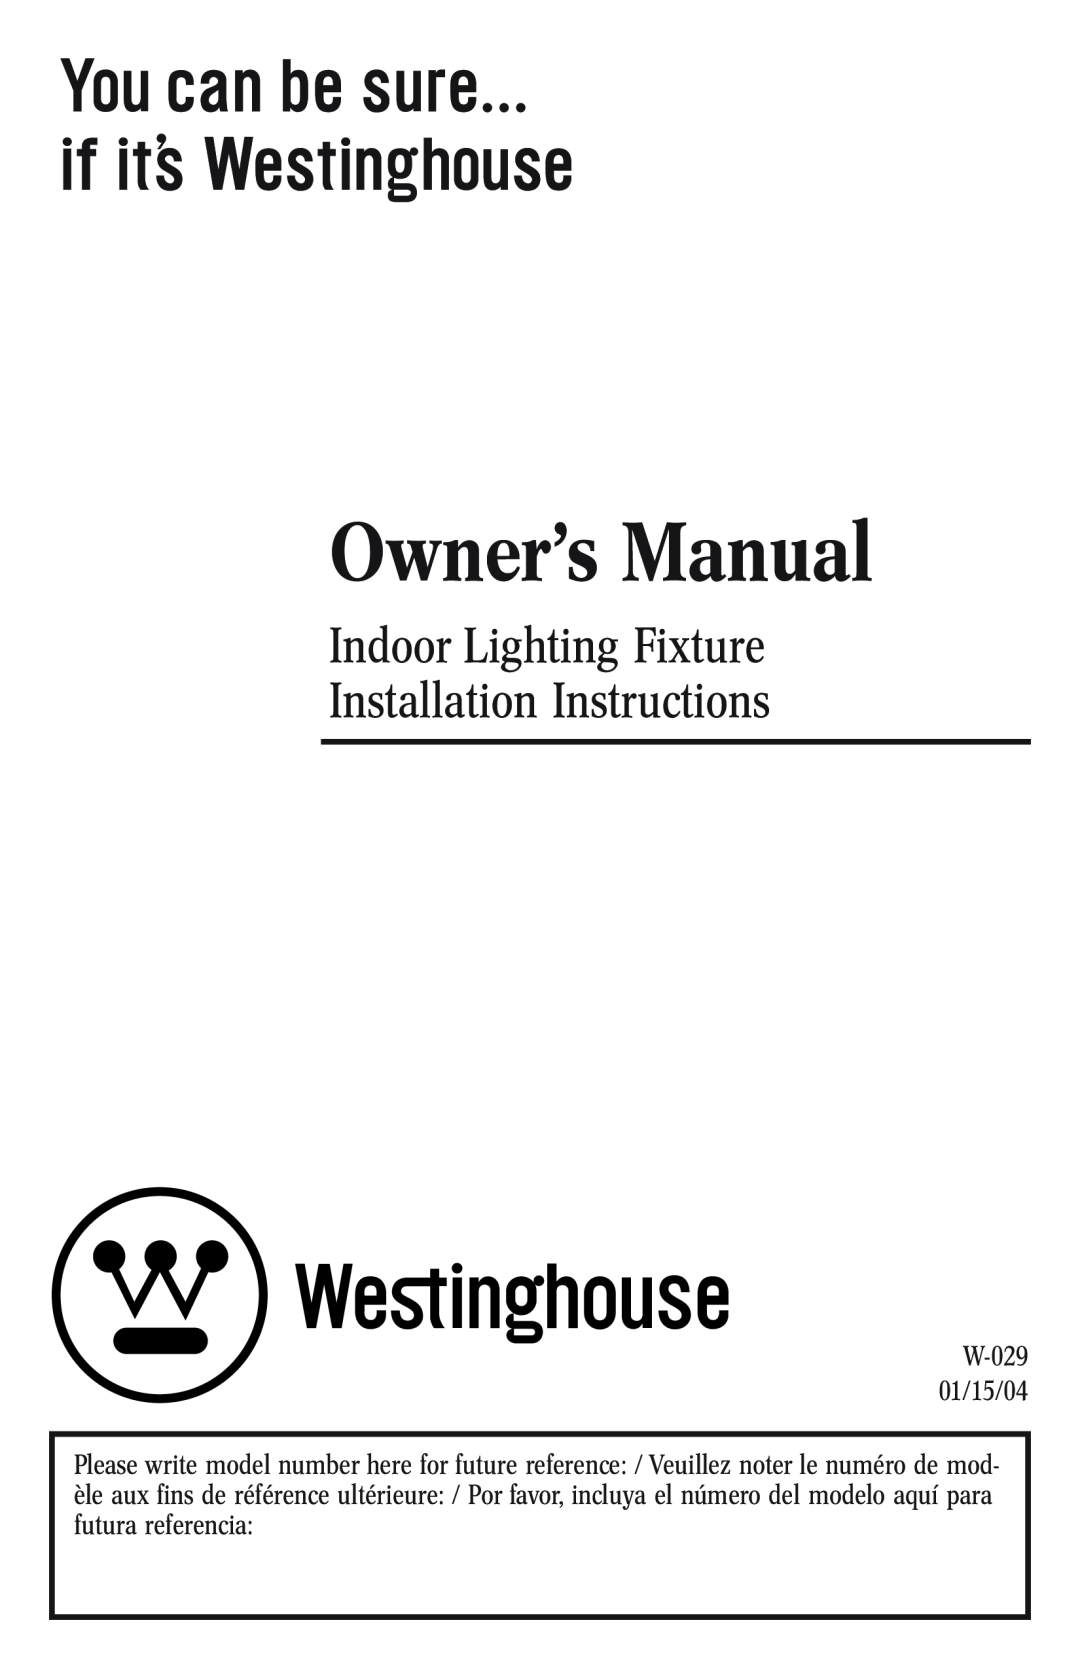 Westinghouse W-029 owner manual Indoor Lighting Fixture Installation Instructions 